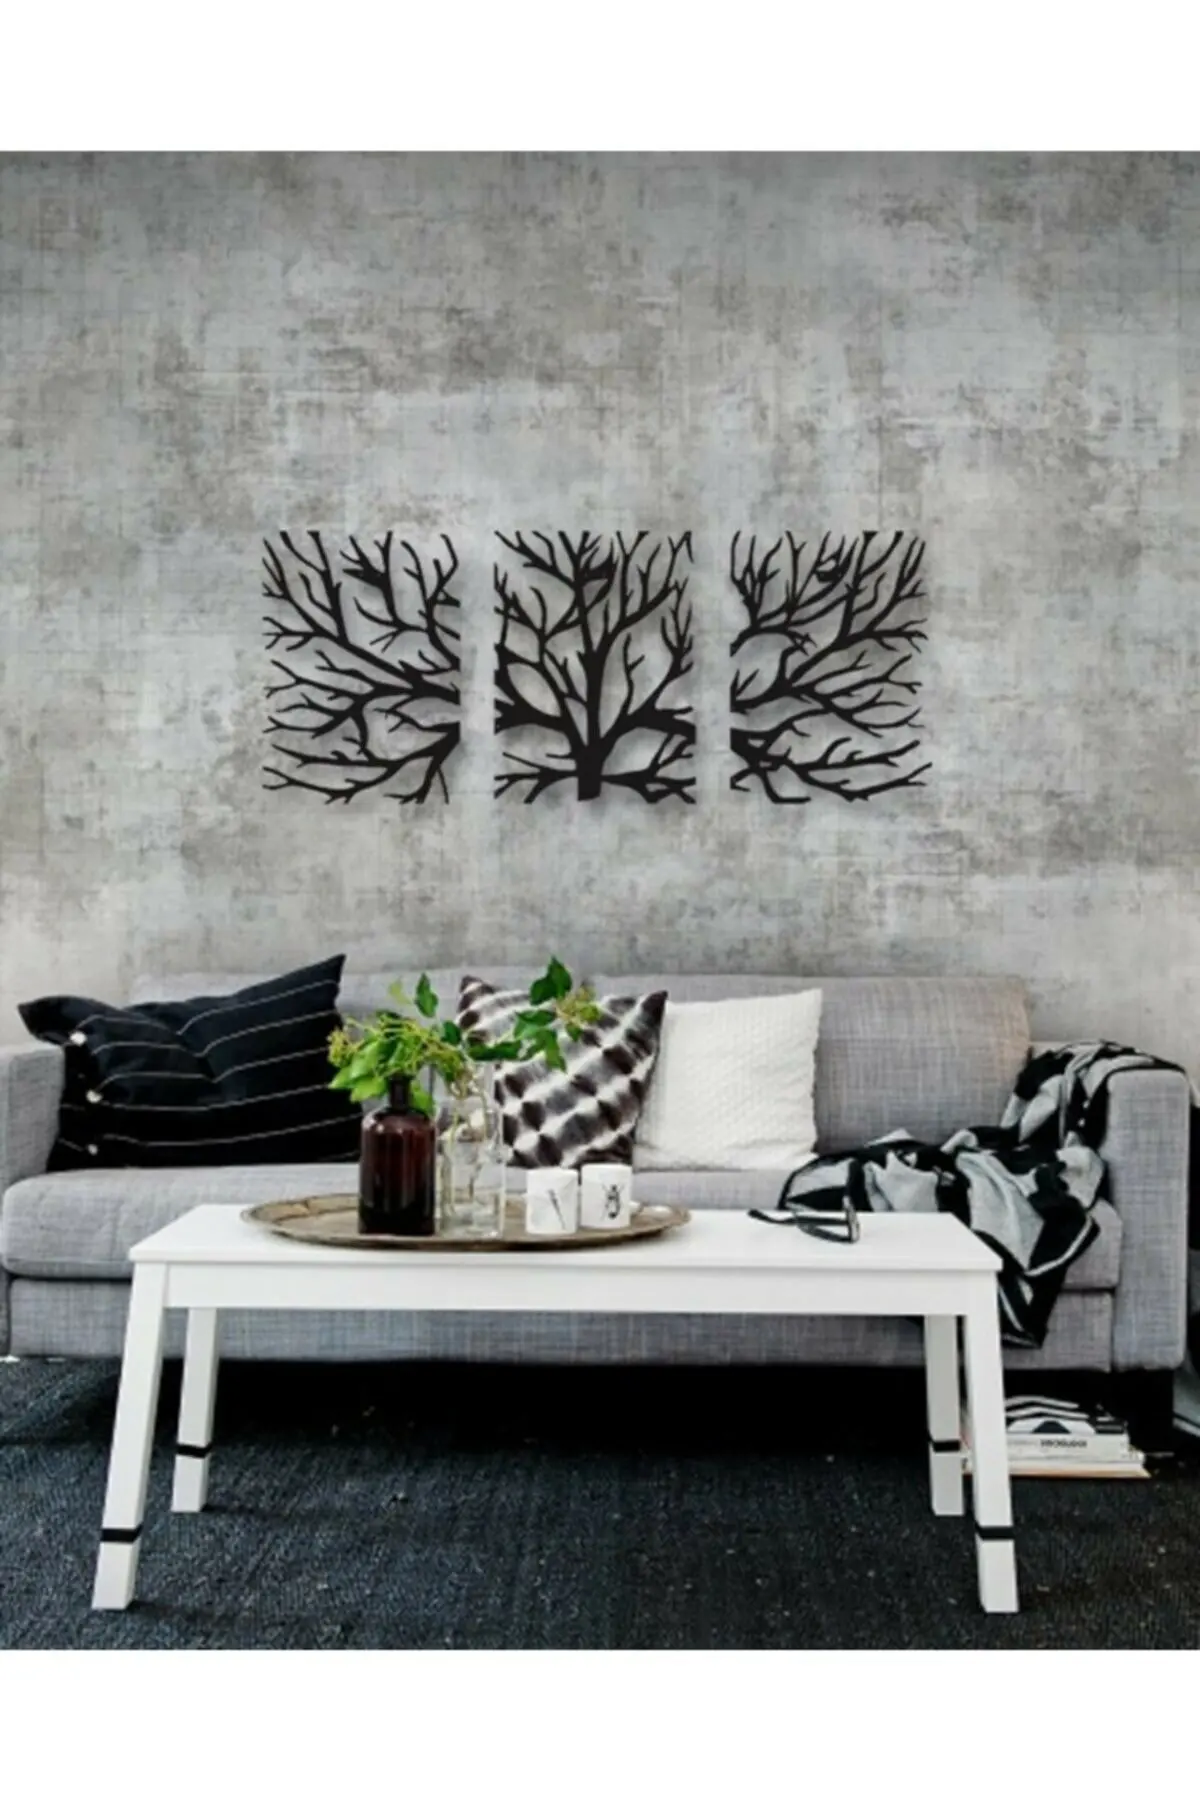 Tree Branches Wall Painting Decorative Wooden Board Poster Table Sticker Black Office Home Room Kitchen School Hotel Cafe Gift